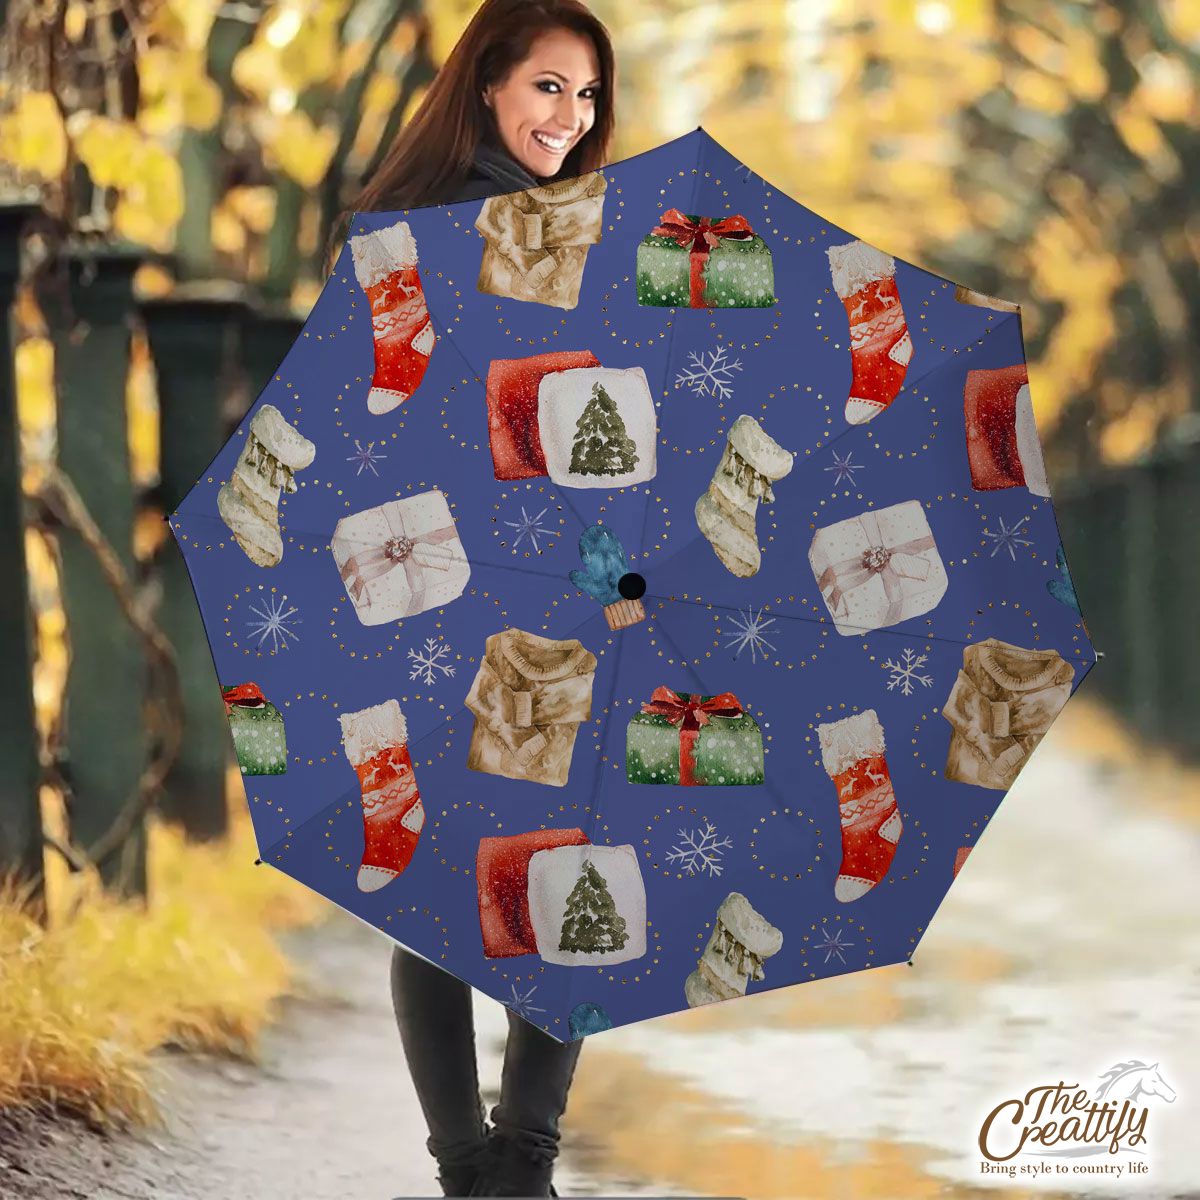 Christmas Gifts, Red Socks, Wool Gloves And Ugly Christmas Sweater Snowflake Blue Pattern Umbrella